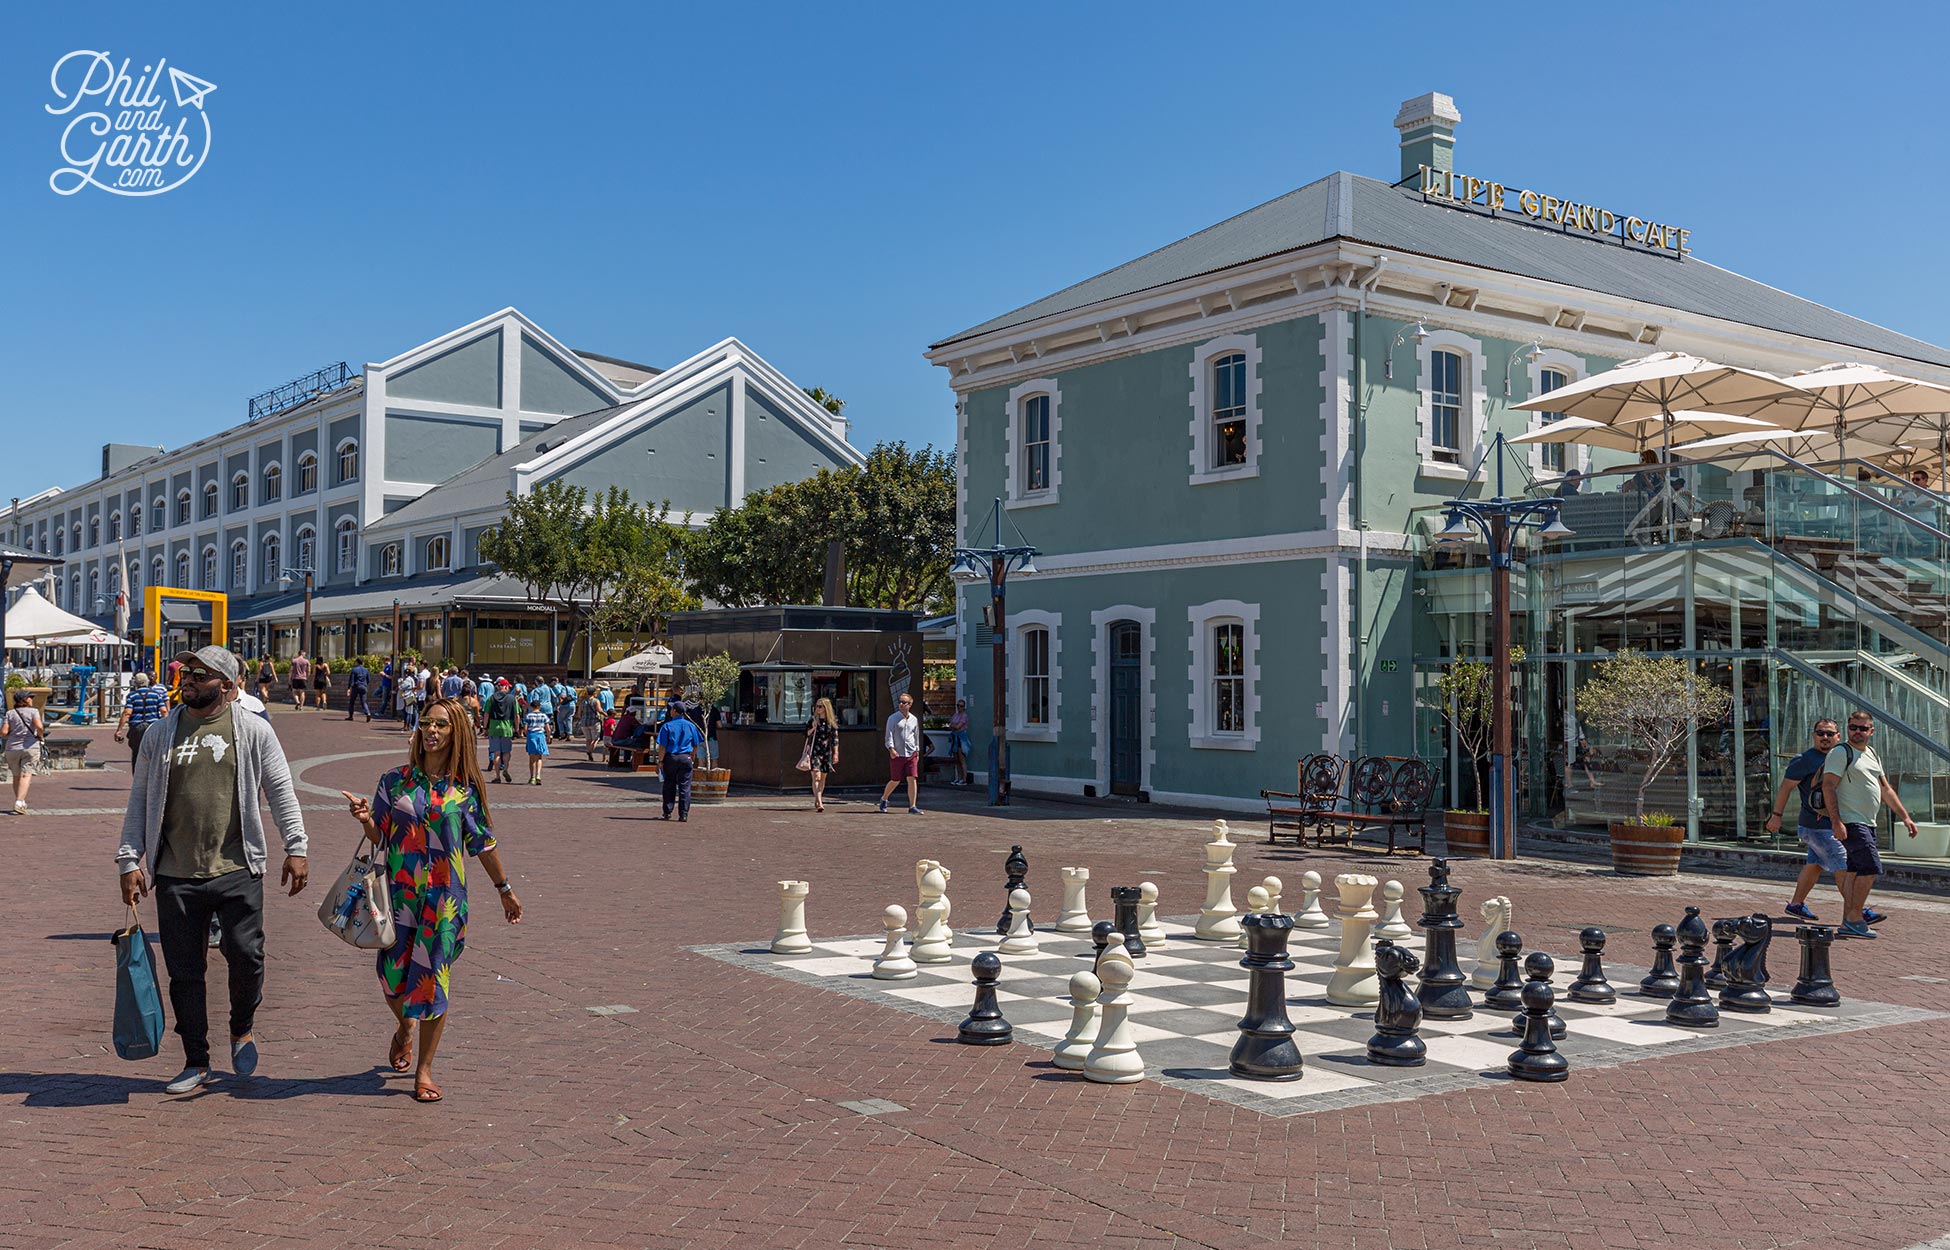 The V&A also has South Africa's oldest working harbour